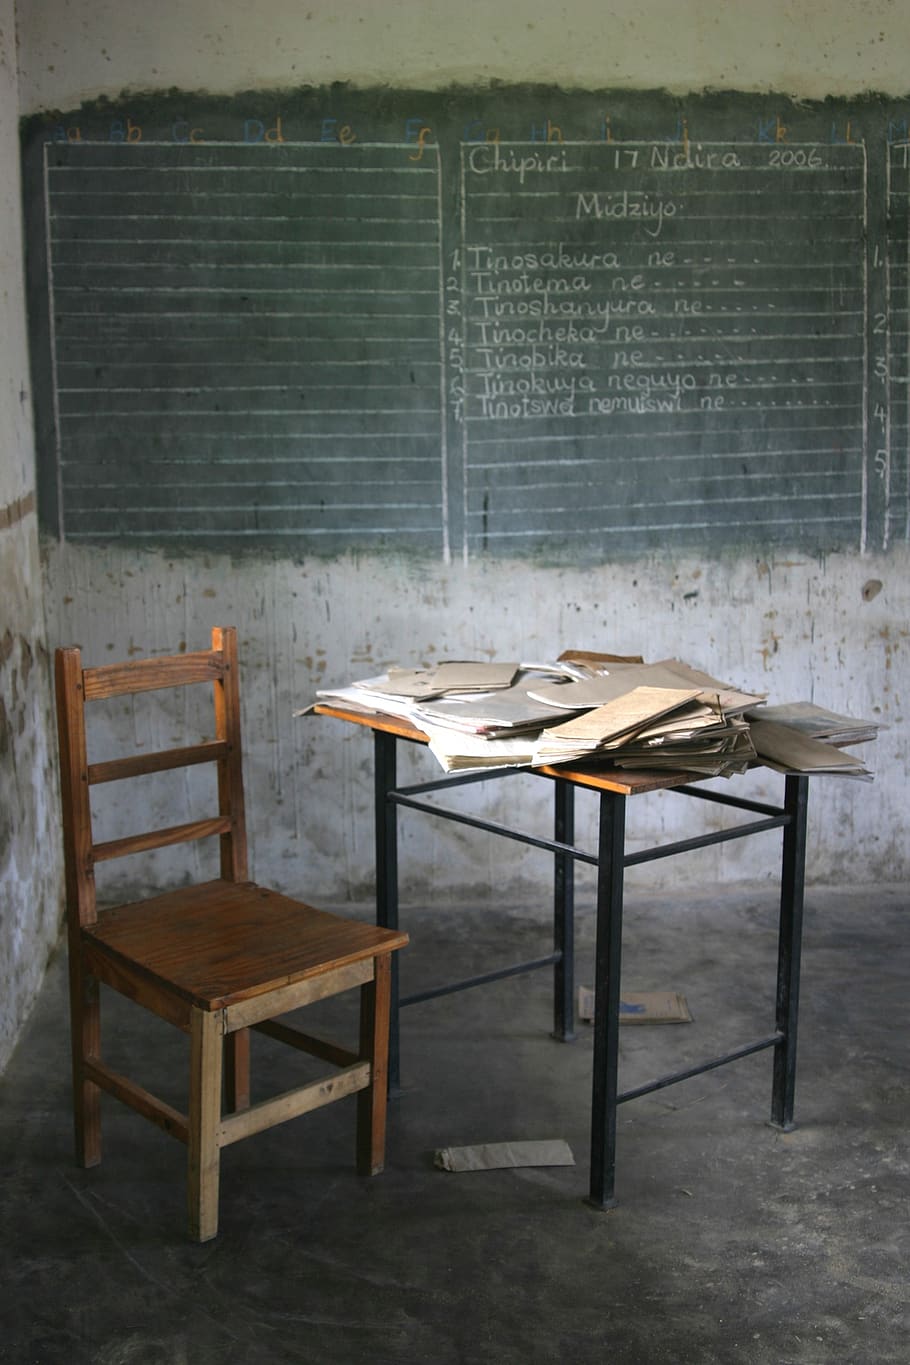 africa, in the classroom, school, blackboard, seat, table, chair, absence, furniture, indoors